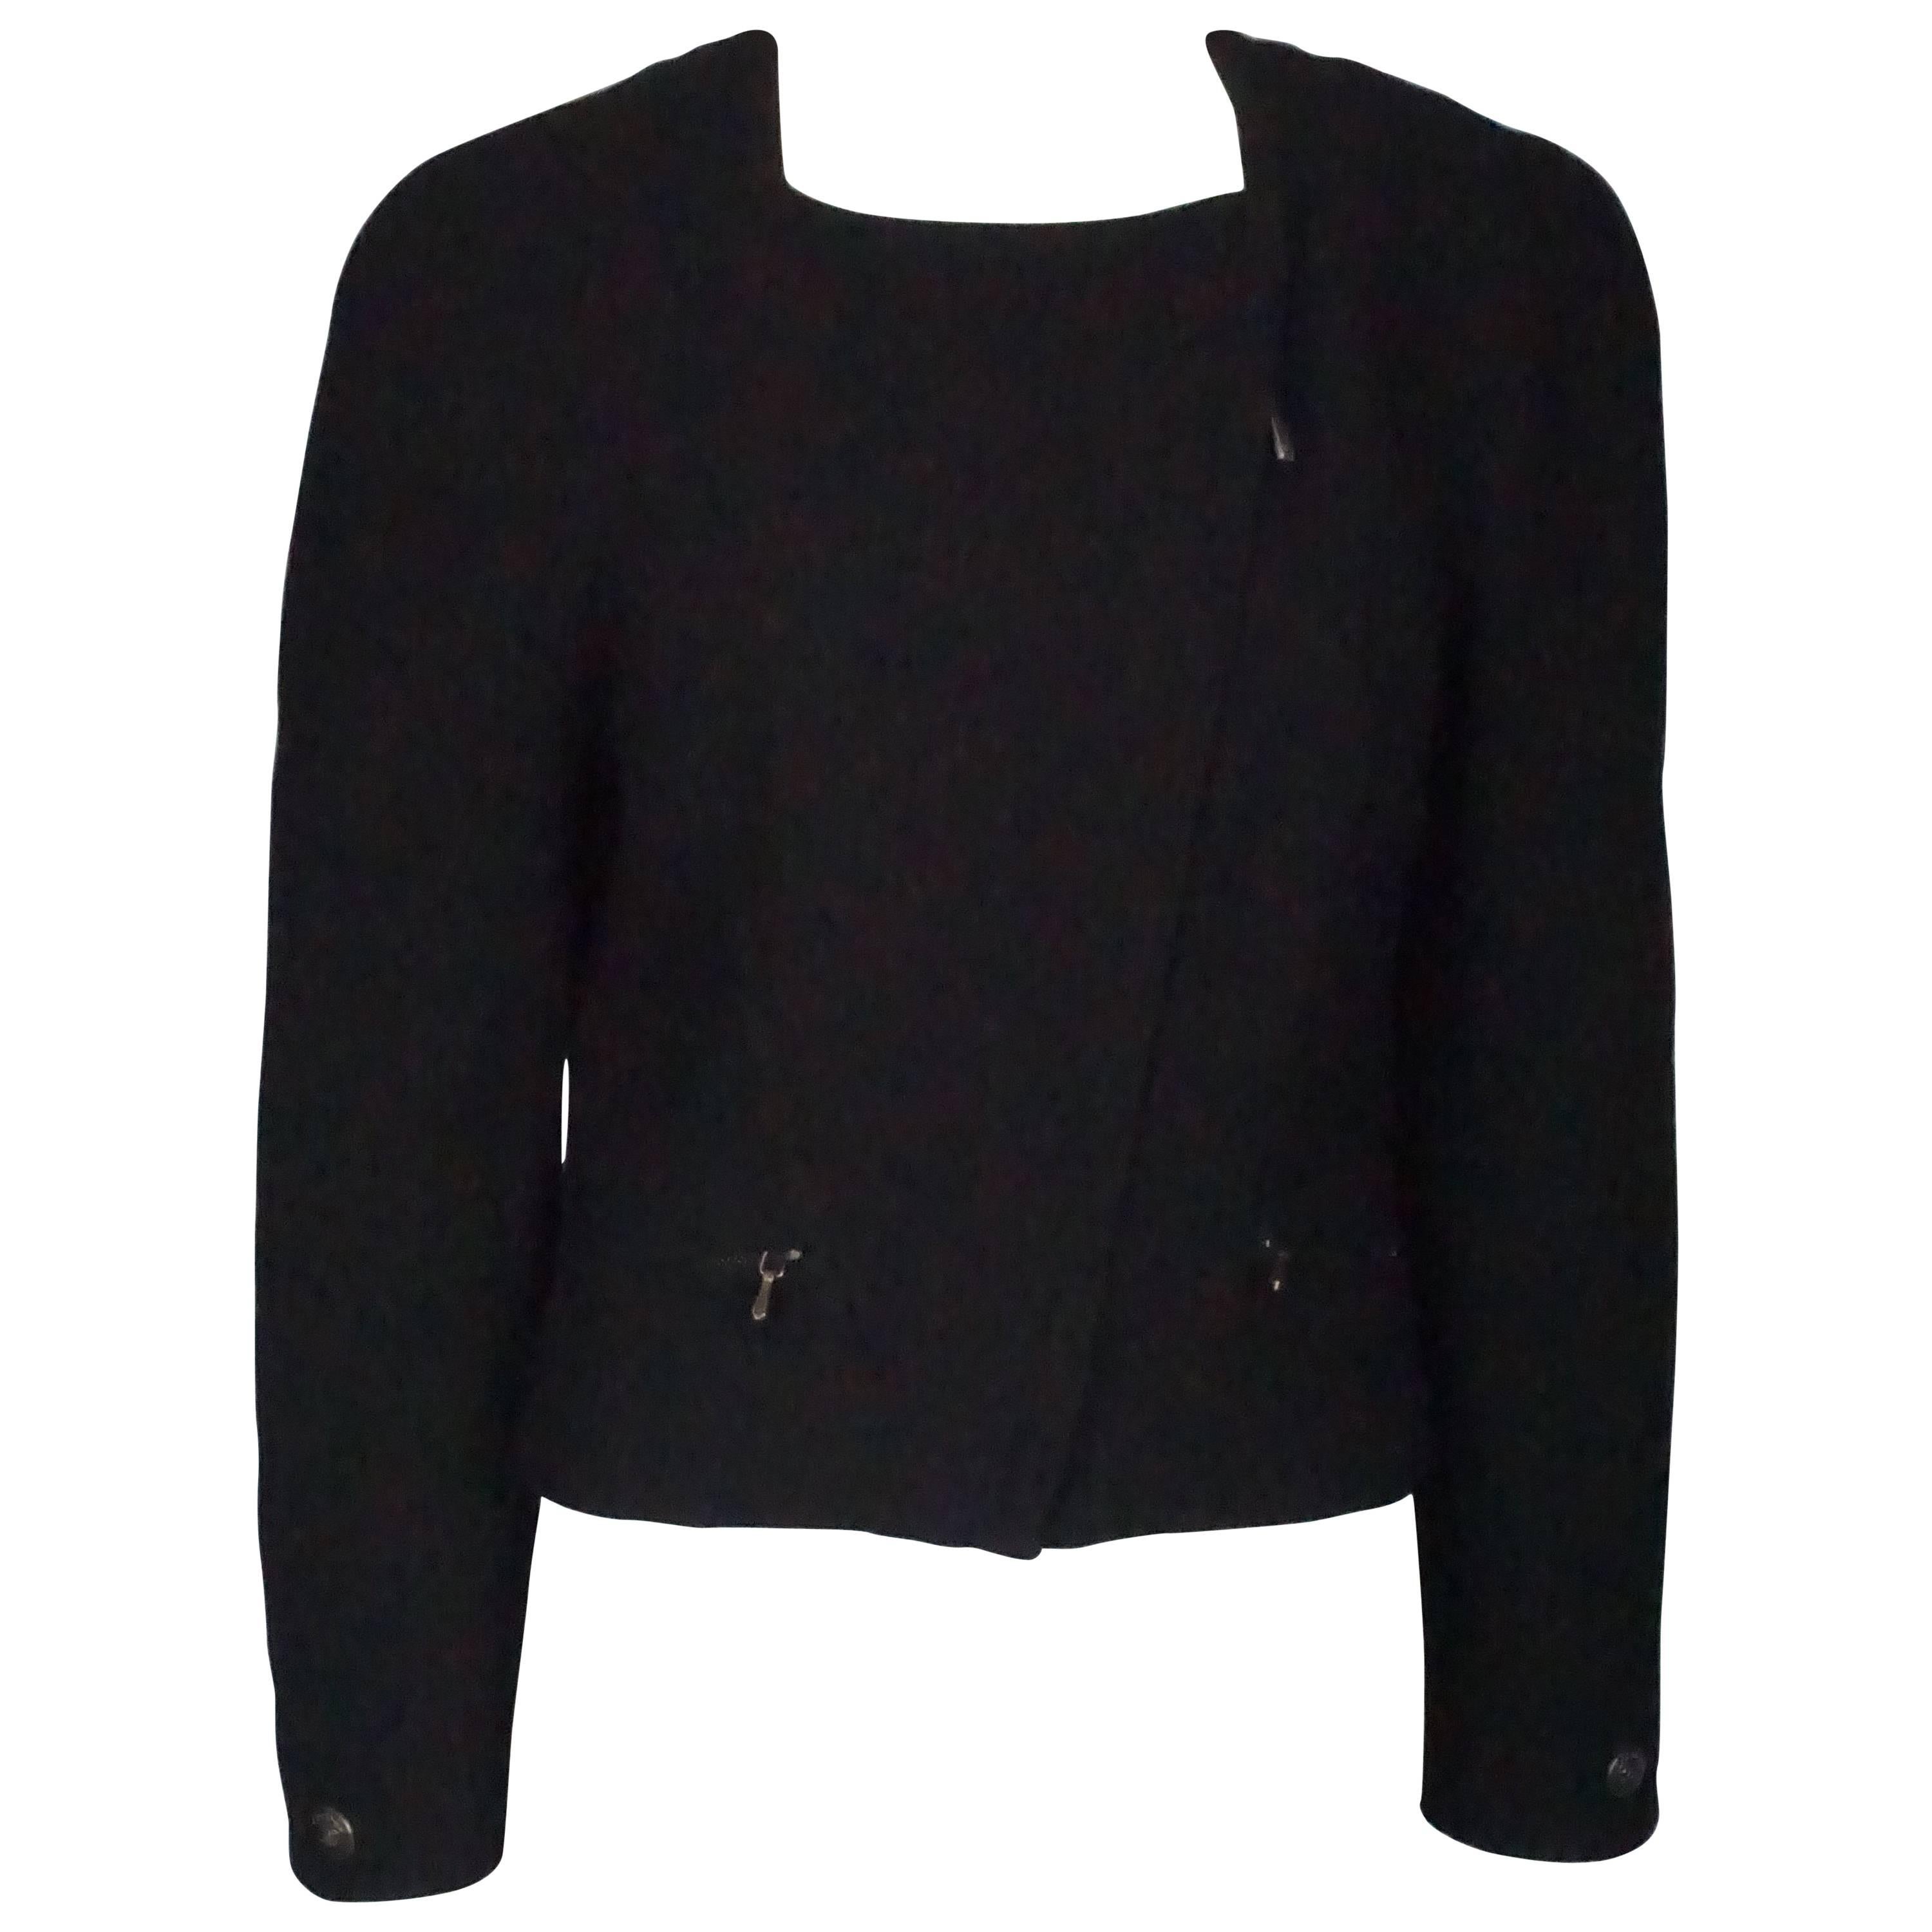 Chanel Black Wool Cropped Jacket with Asymmetrical Zipper Size 40 Circa 1997 For Sale